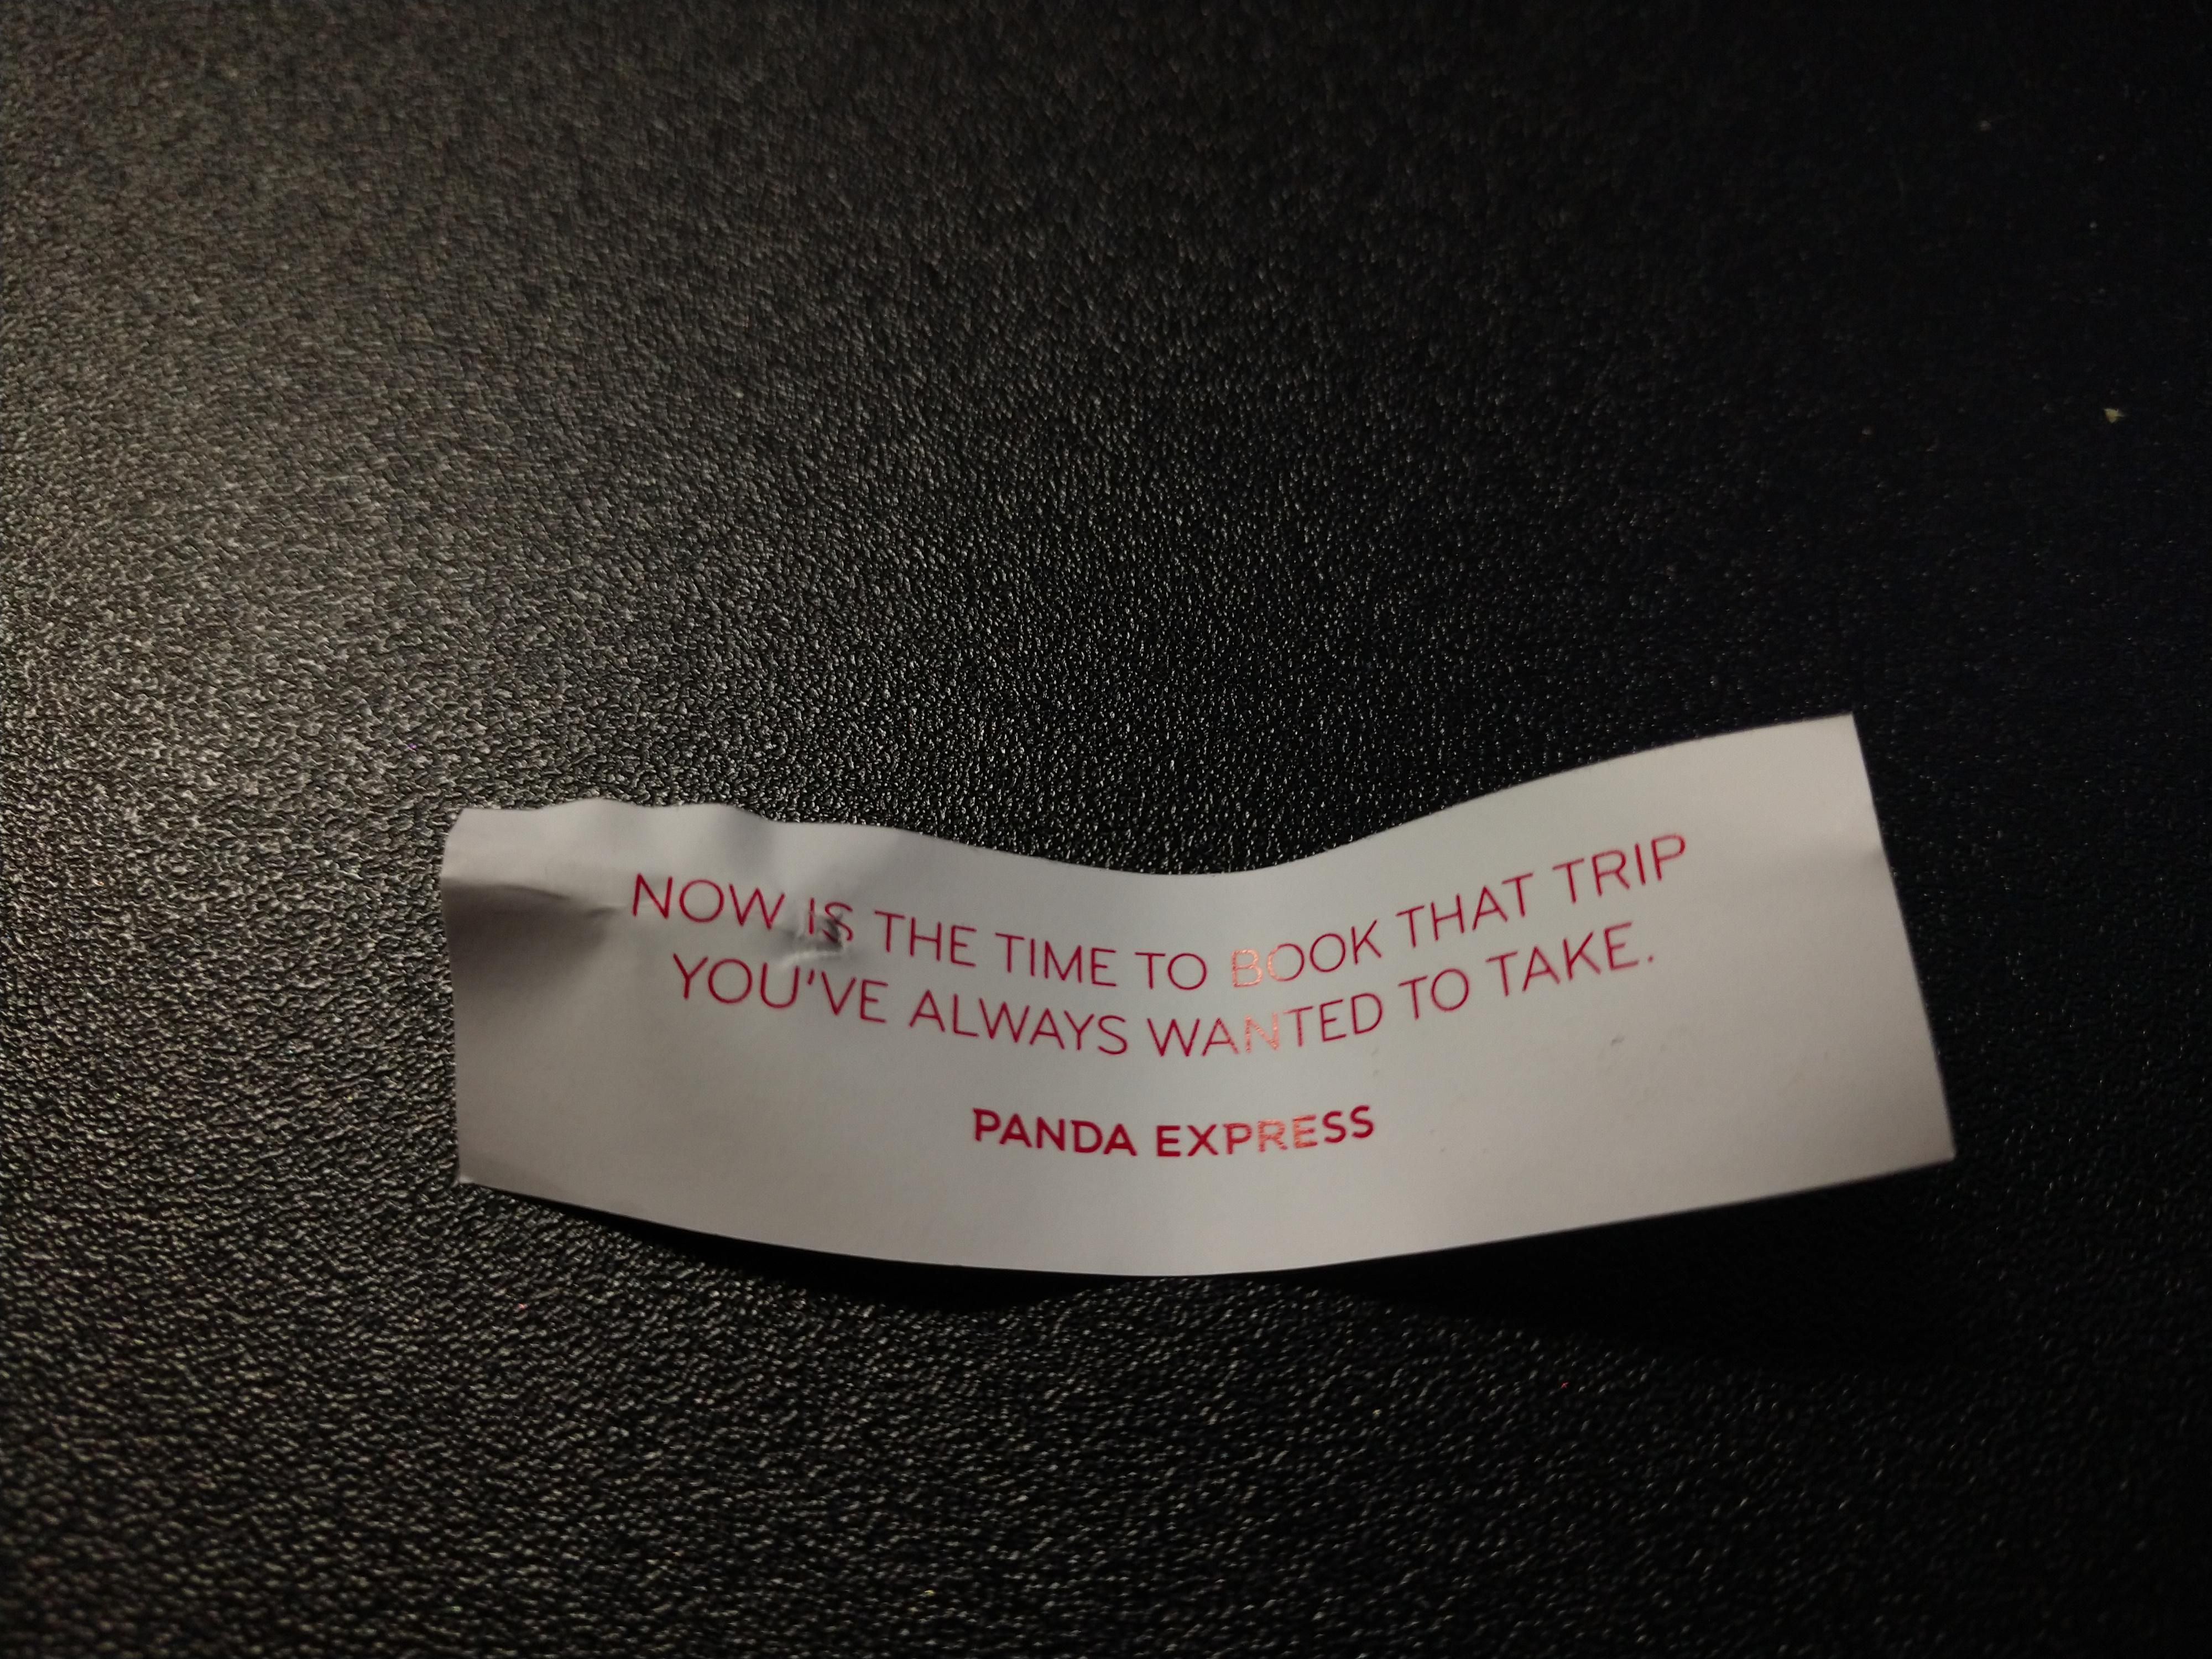 some excellent, timely advice from Panda Express.